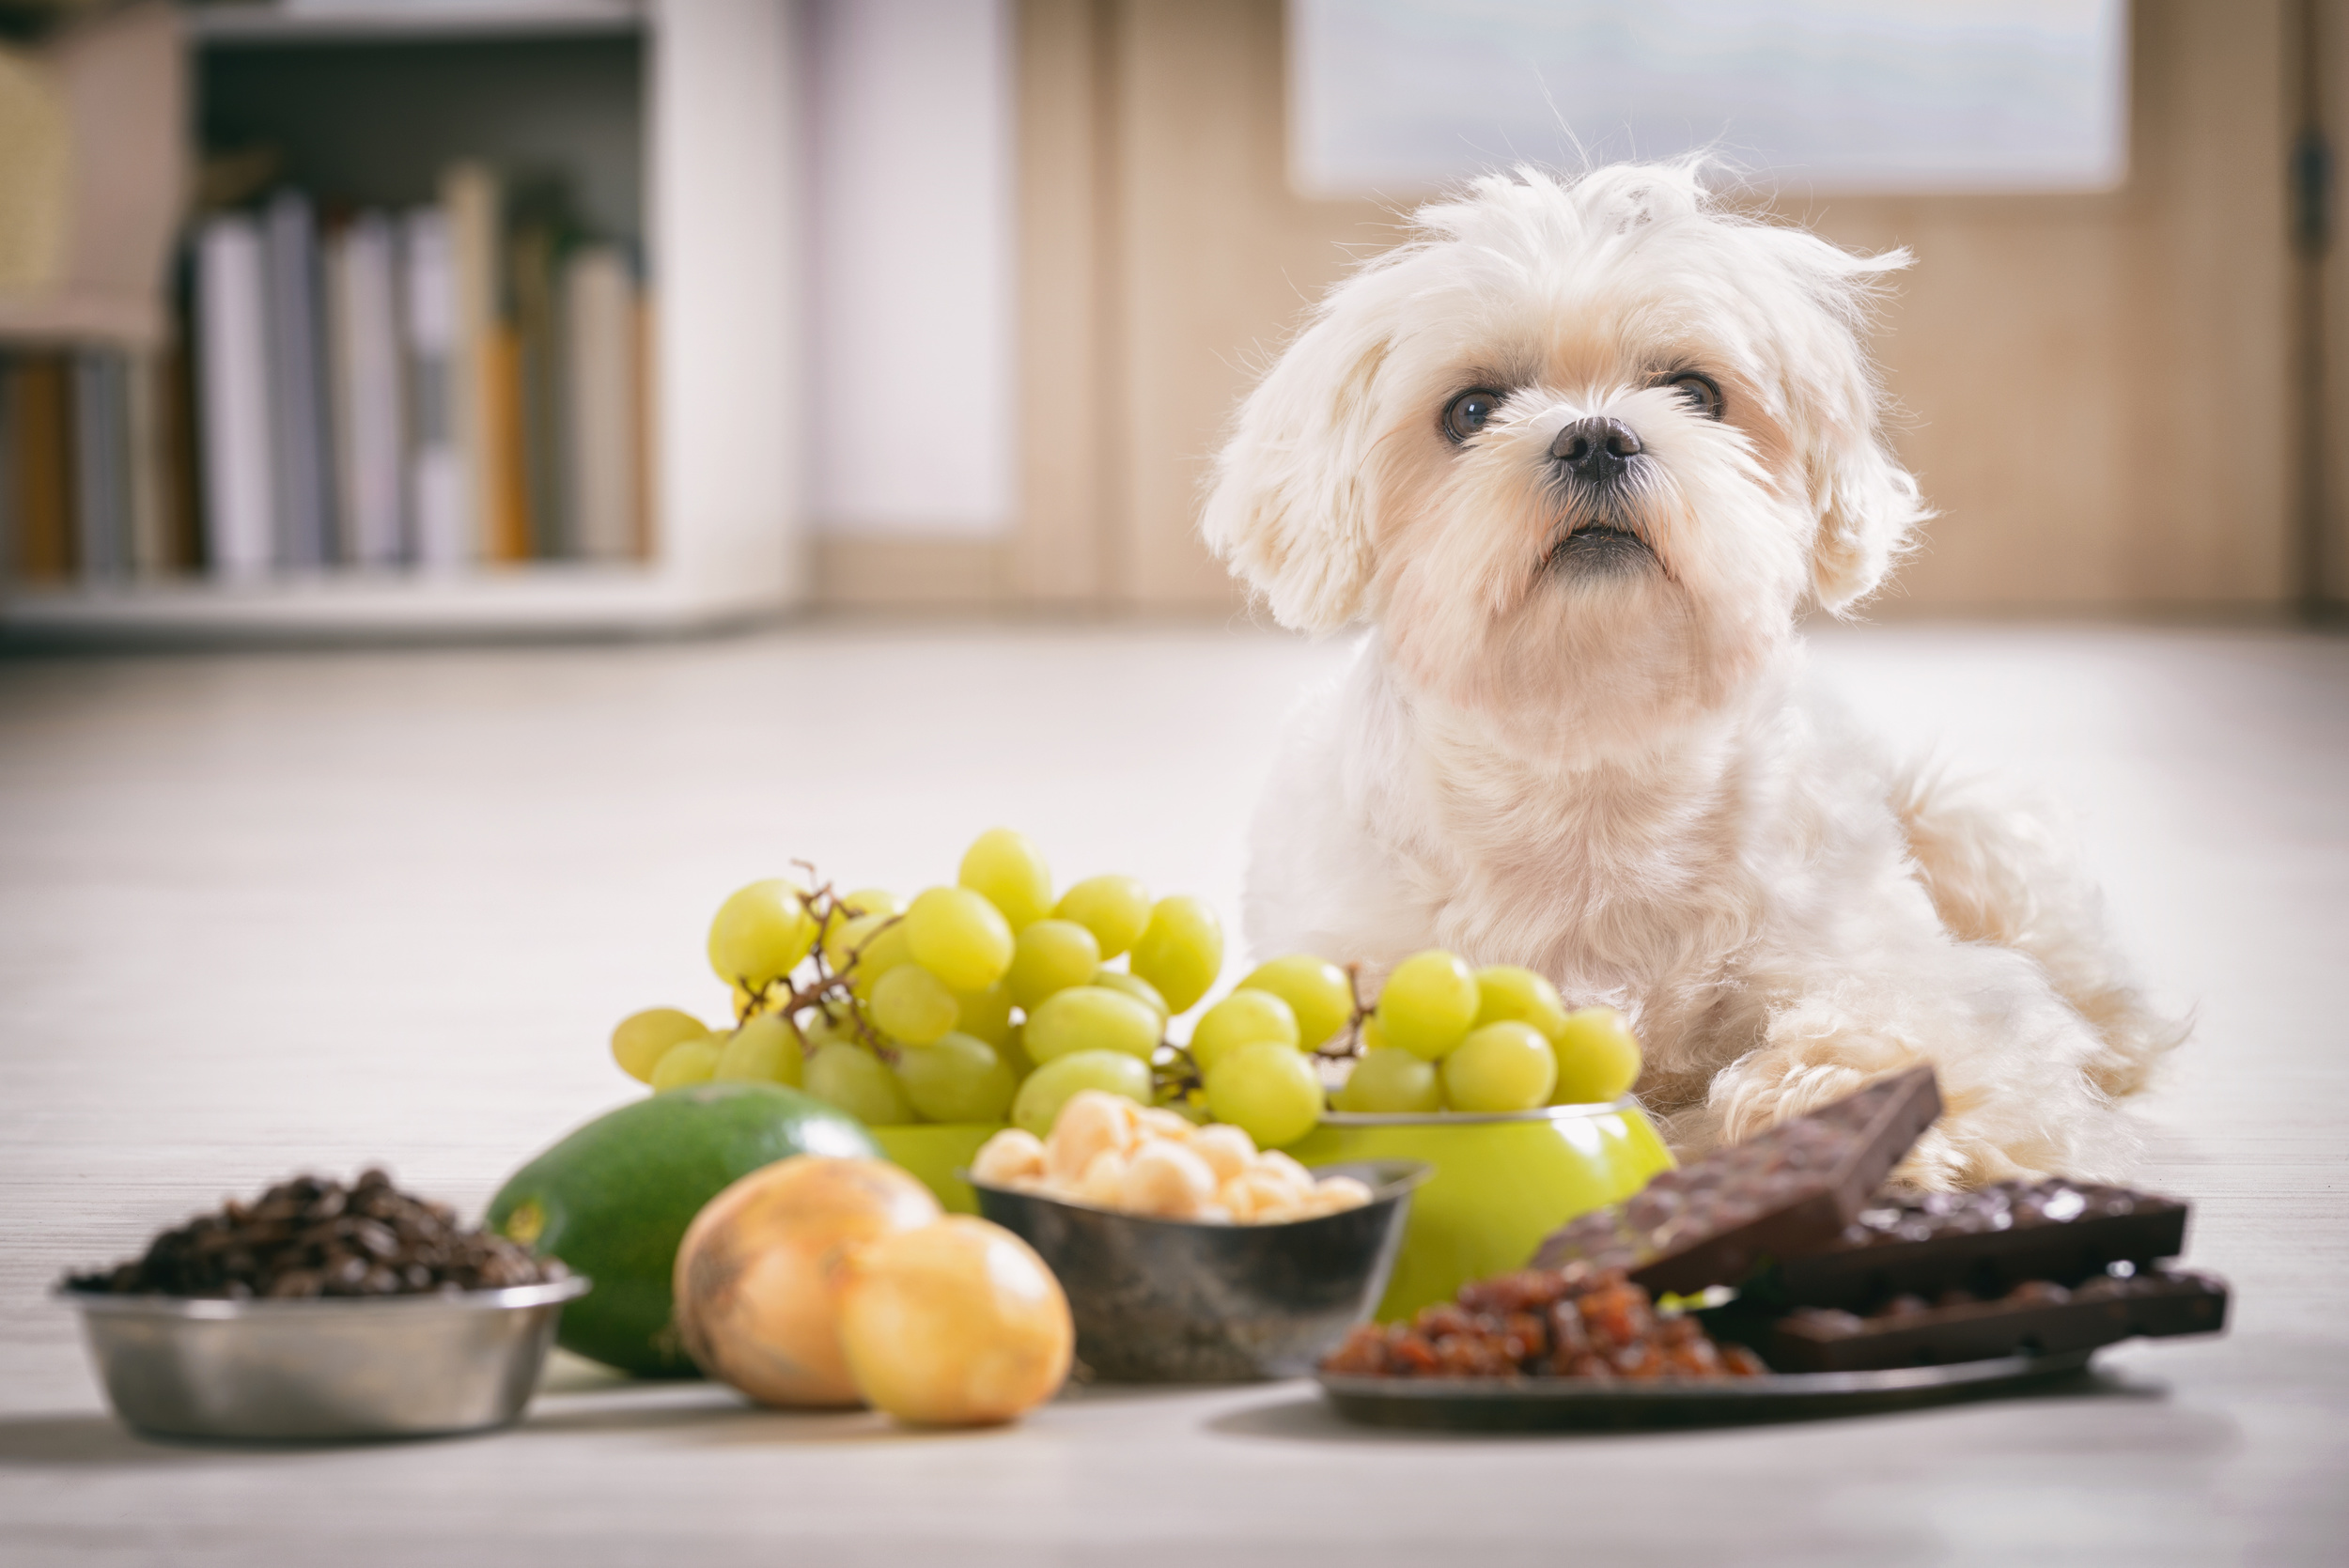 <p>Everything from cleaning supplies to houseplants can be toxic to pets. If you've got a dog or a cat, research which types of plants, cleaners, and foods are poisonous and keep your pet away from them. </p><p><a href='https://www.msn.com/en-us/community/channel/vid-cj9pqbr0vn9in2b6ddcd8sfgpfq6x6utp44fssrv6mc2gtybw0us'>Did you enjoy this slideshow? Follow us on MSN to see more of our exclusive lifestyle content.</a></p>